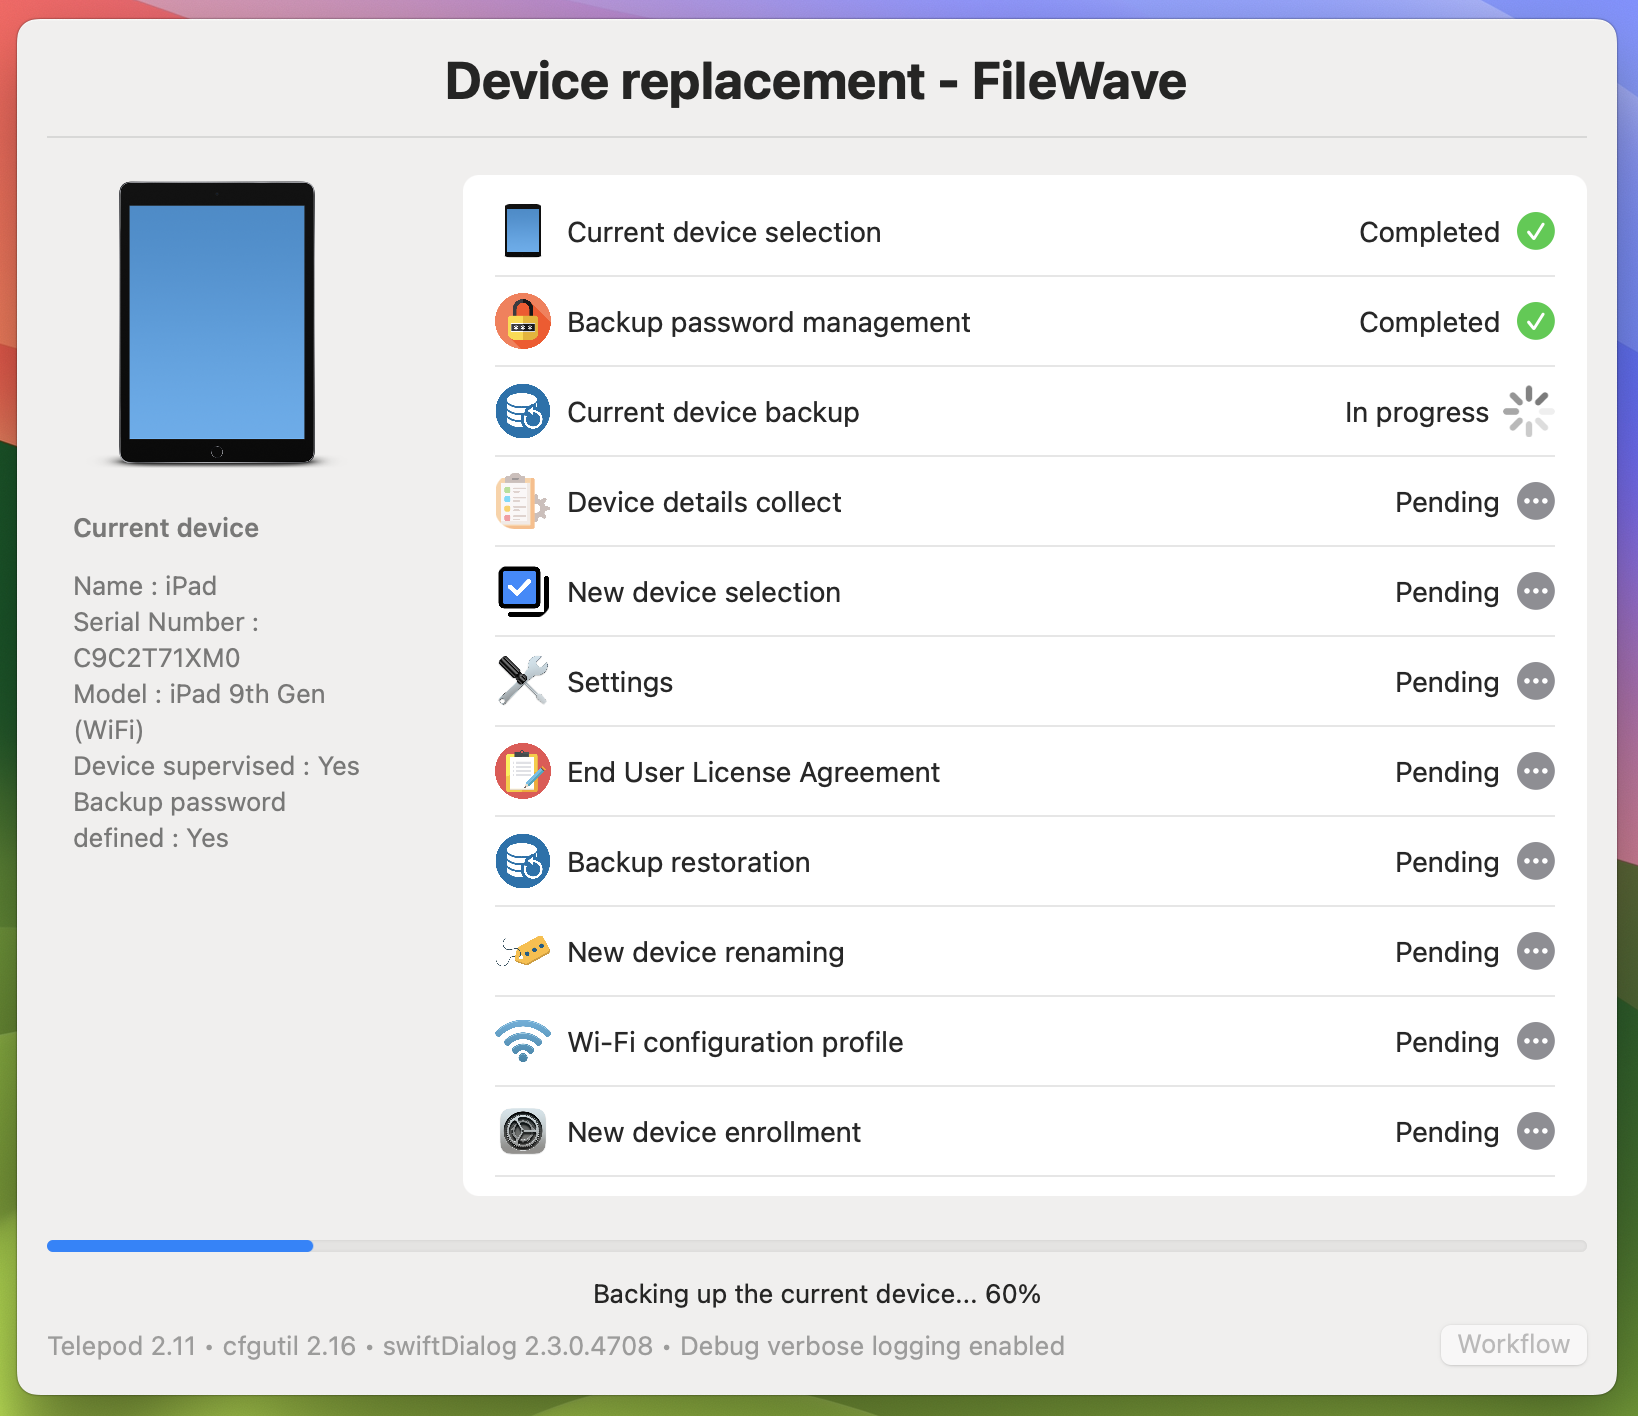 telepod_2_replacement_filewave_006_Current device backup.png